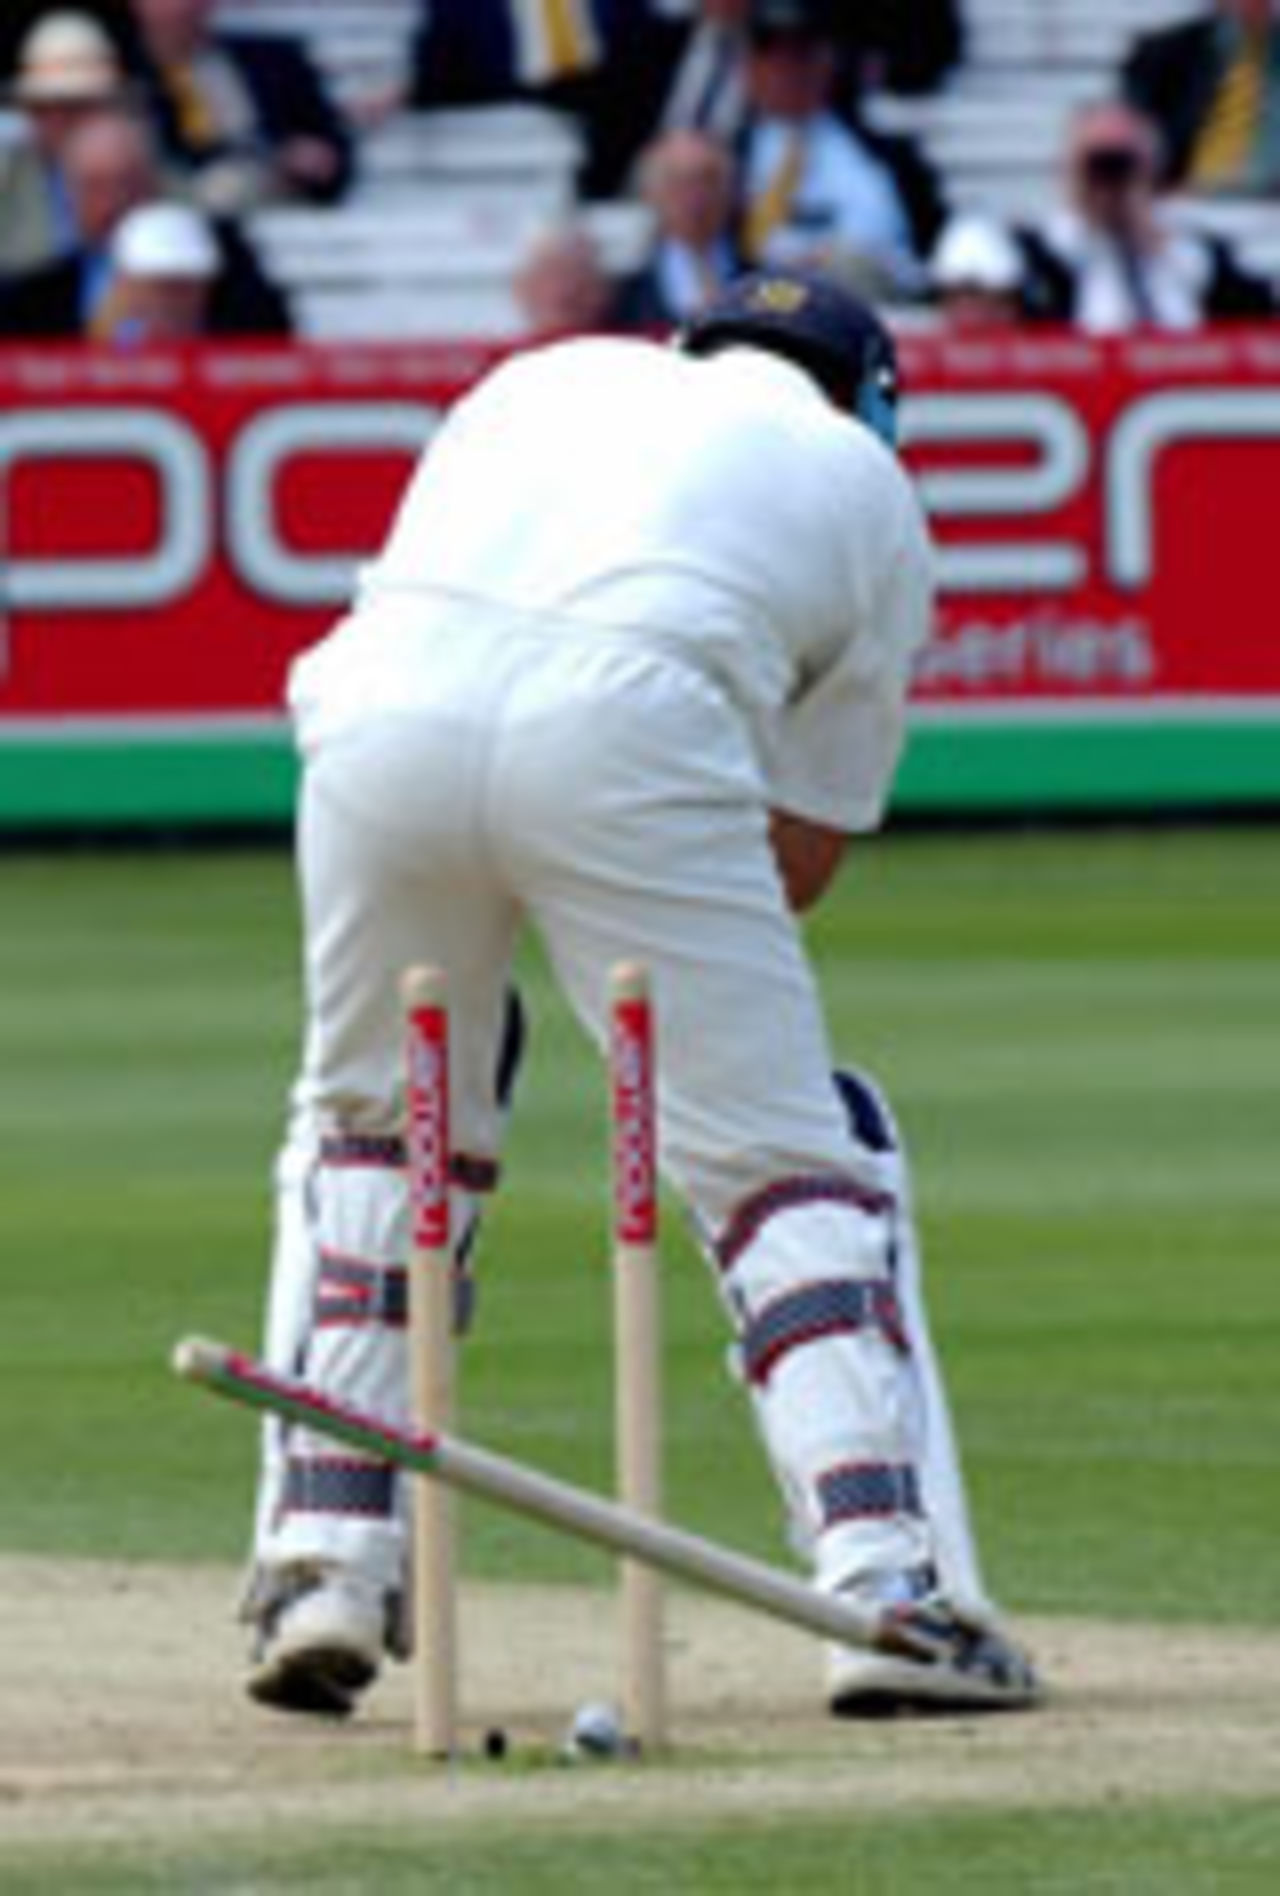 Nasser Hussain is bowled, England v New Zealand, 1st Test, Lord's, May 22, 2004